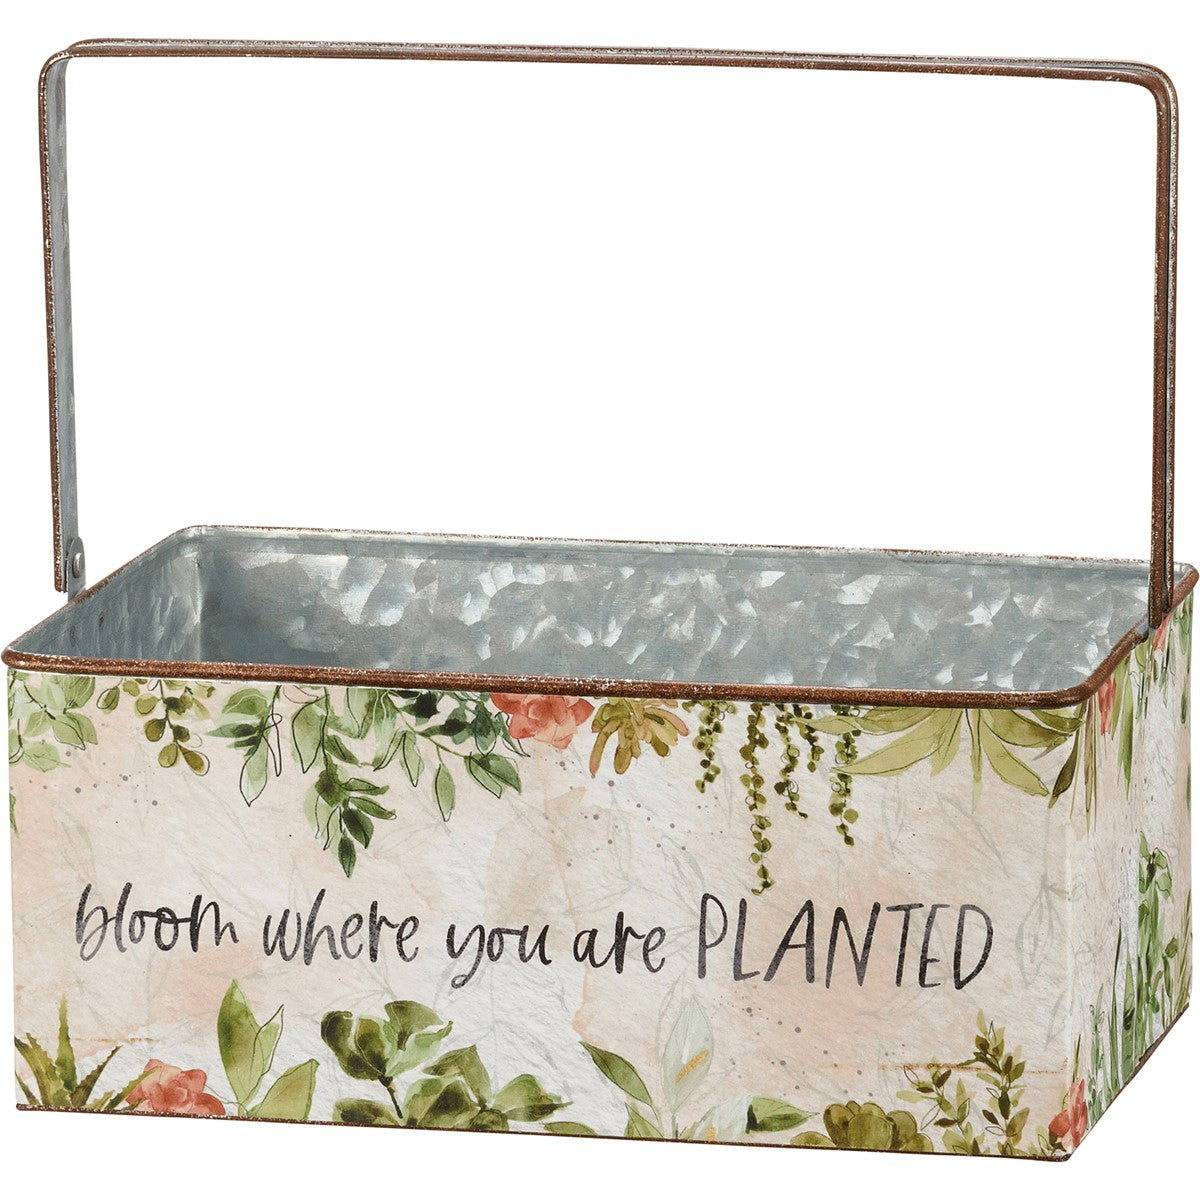 Garden Bin | Bloom Where you are Planted